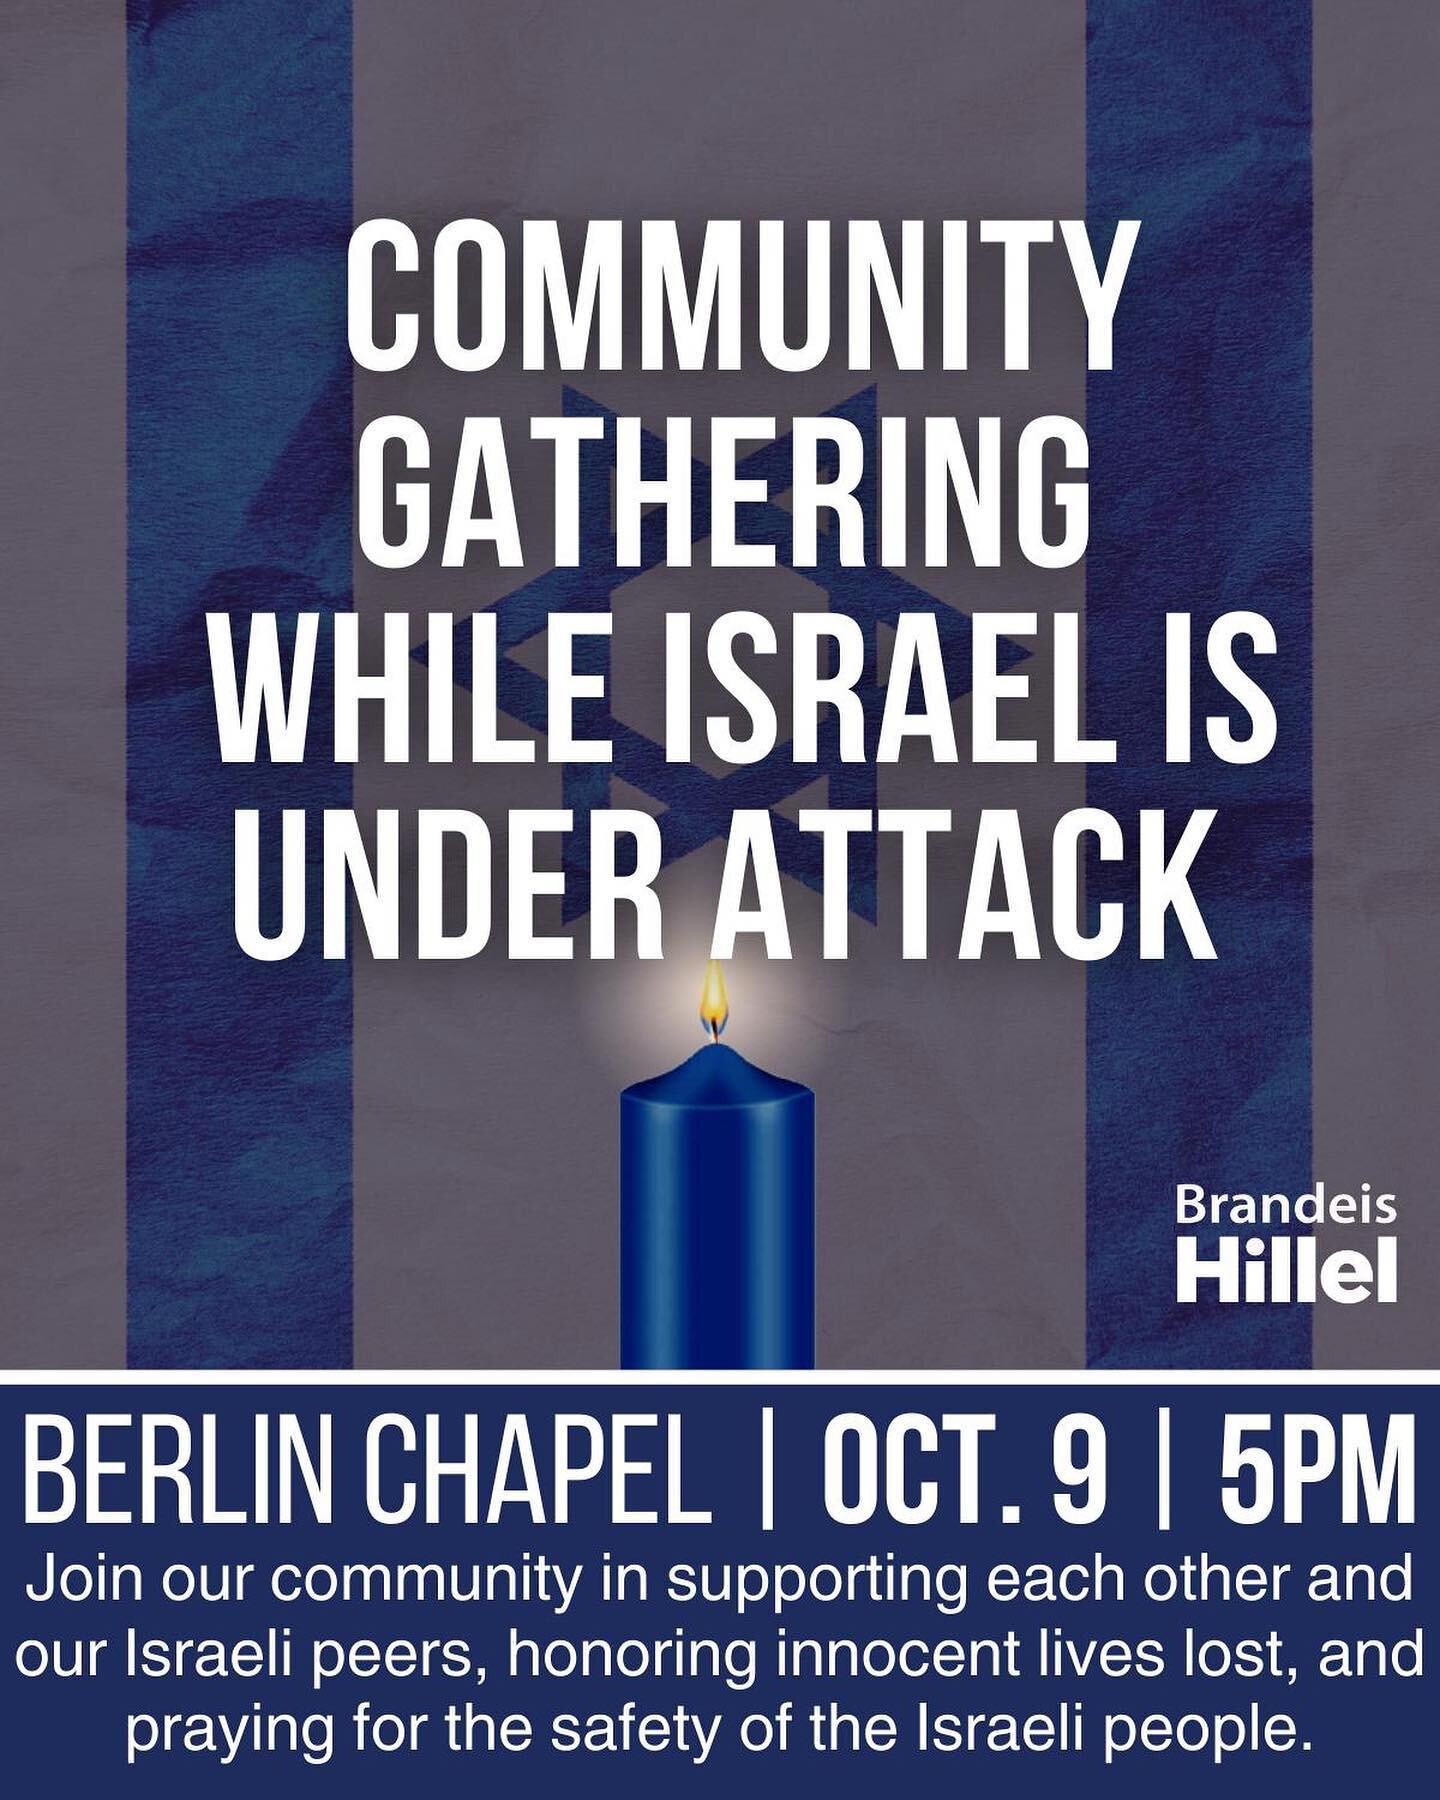 Dear Brandeis Community,

As many of you are aware, over the holiday weekend Hamas attacked Israel in an unprecedented and deadly assault that is still ongoing; war has been declared and even as horrifying images and stories are shared from the front